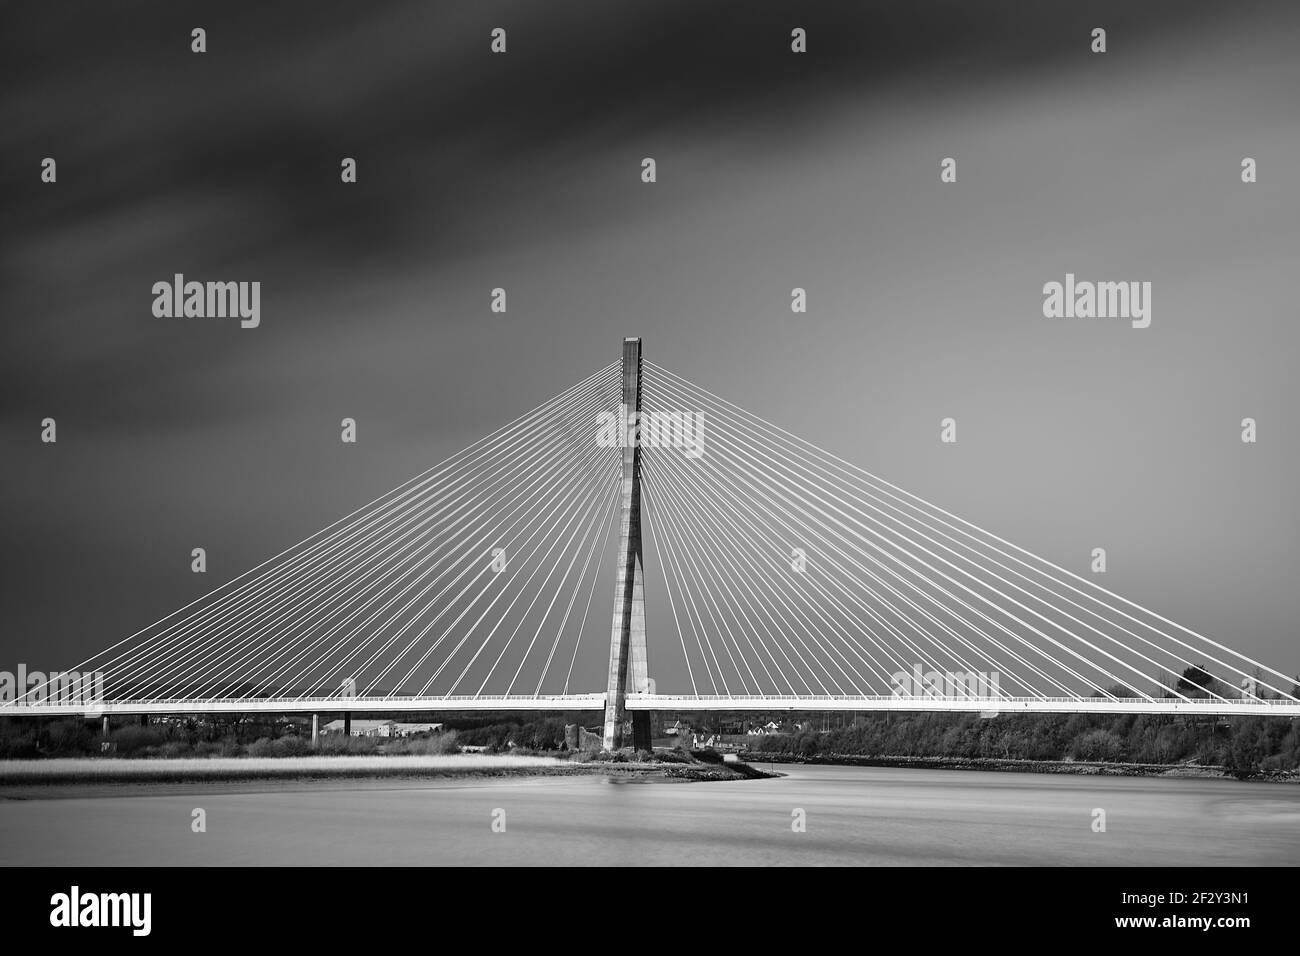 suspension bridge from the Waterford Highway to Kilkeny. Ireland. long exposure with cloudy day. Stock Photo